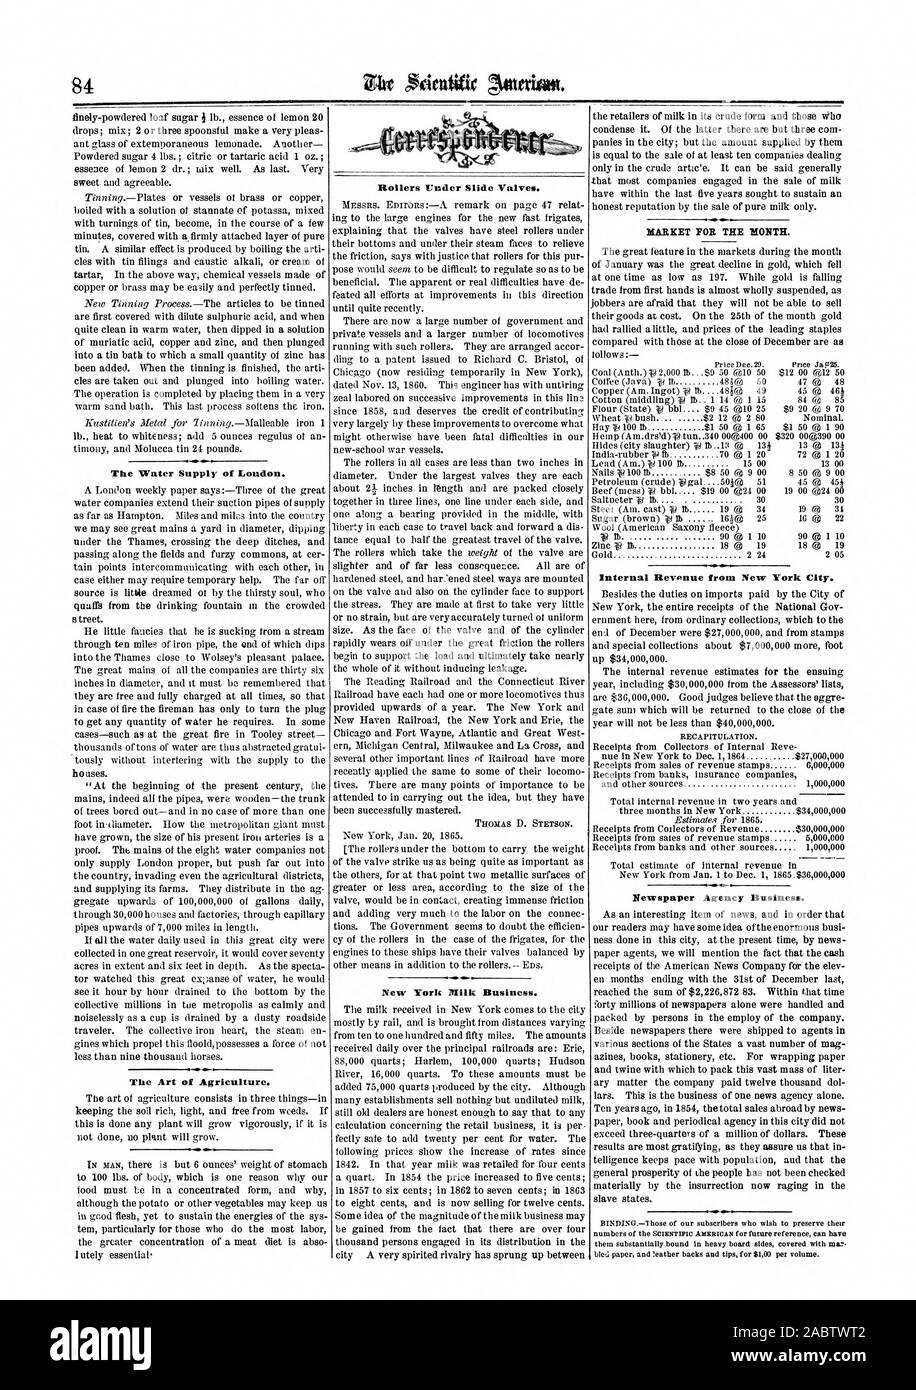 The Water Supply of Loudon. street. The Art of Agriculture. Rollers Under Slide Valves. New York Milk Business. MARKET FOR THE MONTH. Internal Revenue from New York City. Newspaper Agency Business., scientific american, 1865-02-04 Stock Photo